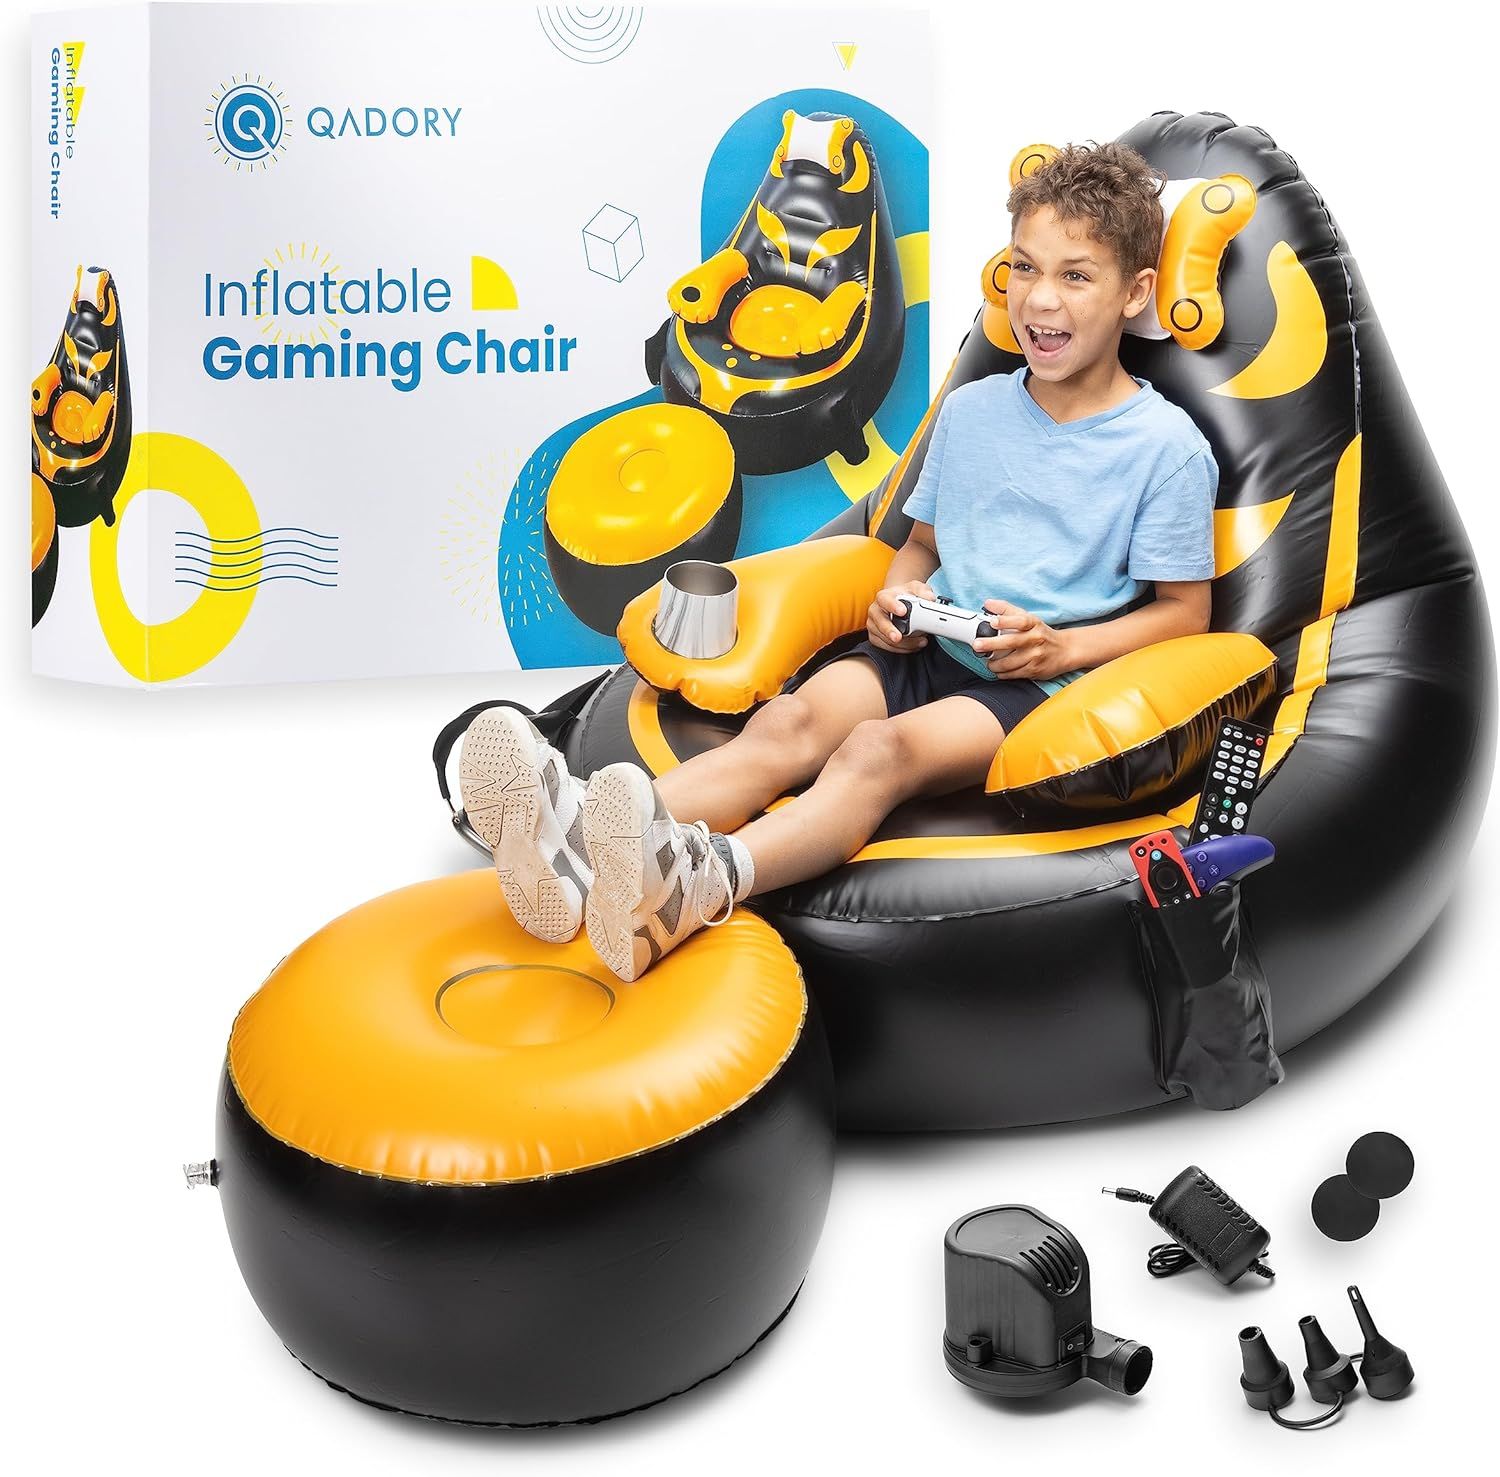 Qadory Gaming Chair for Kids